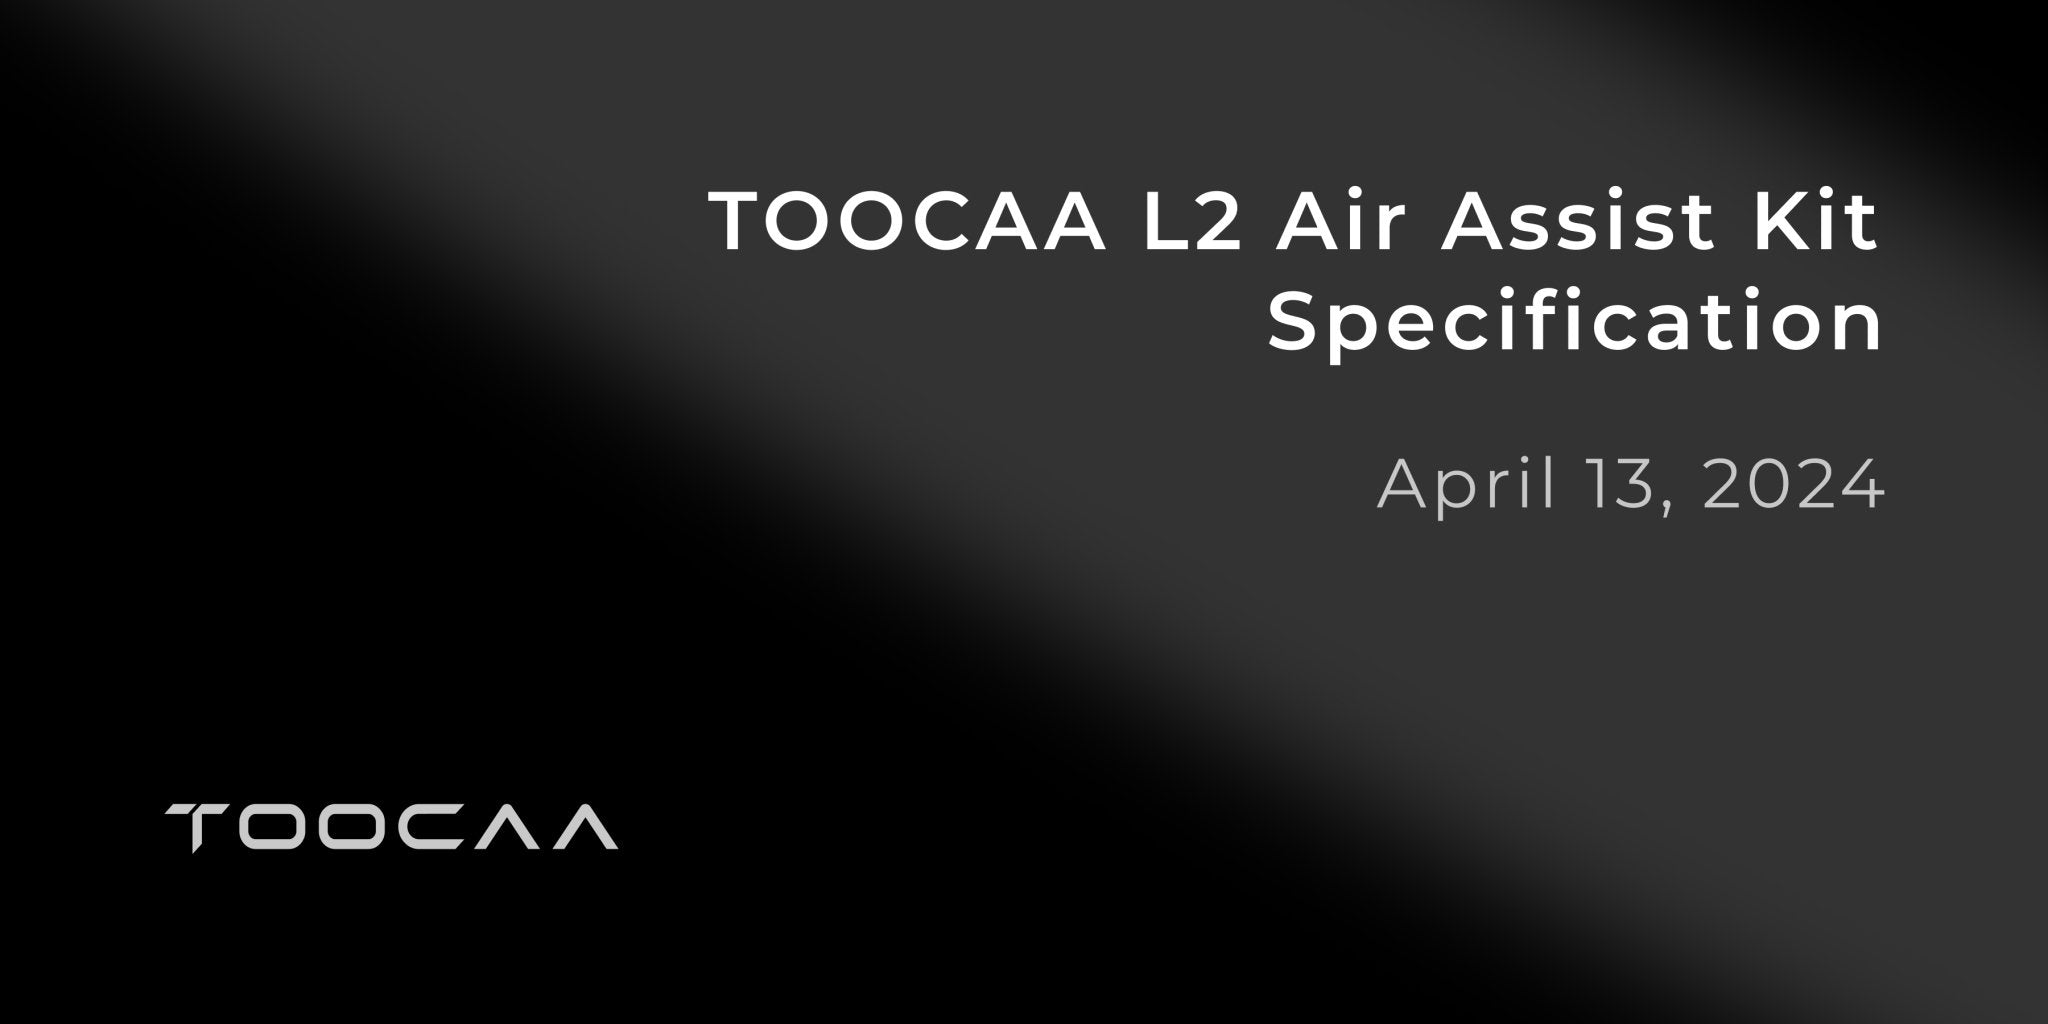 TOOCAA L2 Air Assist Kit Specification